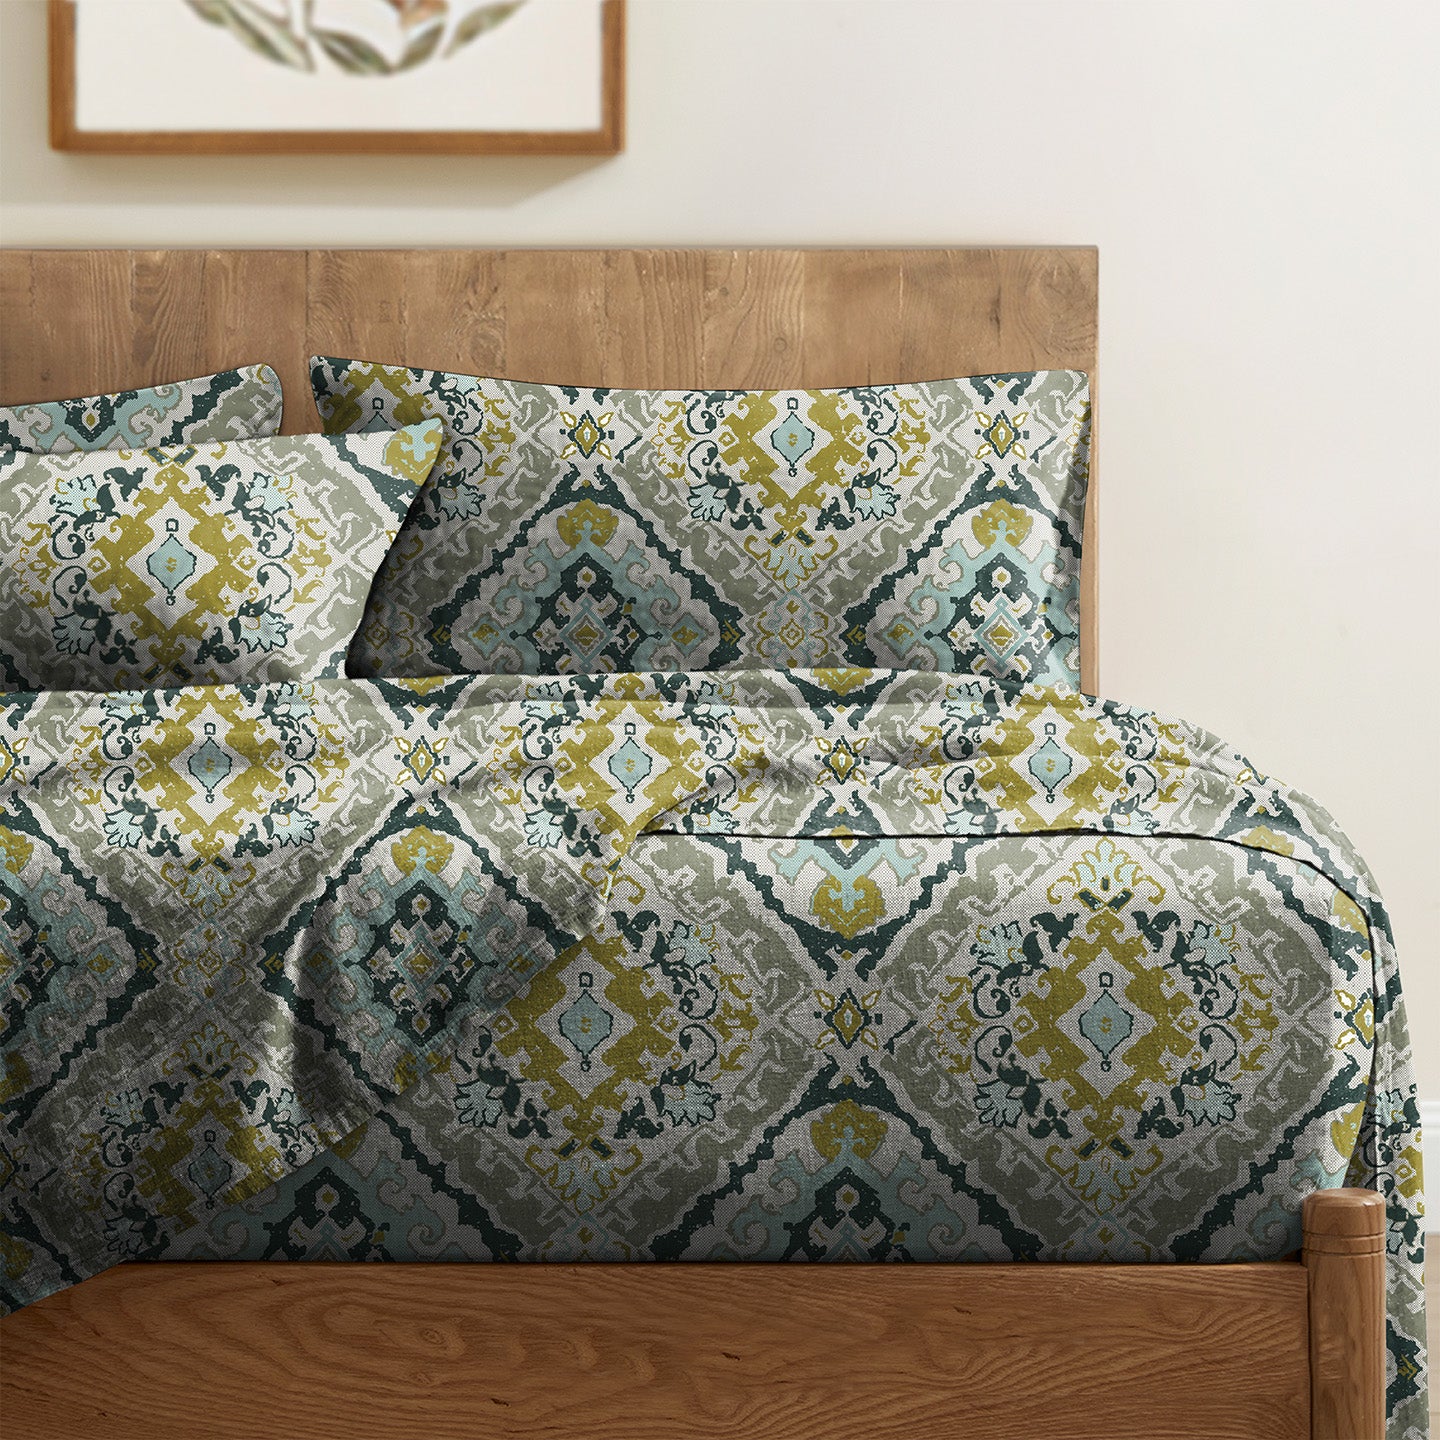 MOROCCO ABYSS BEDSHEET FOR DOUBLE BED WITH 2 PILLOWCOVERS SIZE (104" X 90")